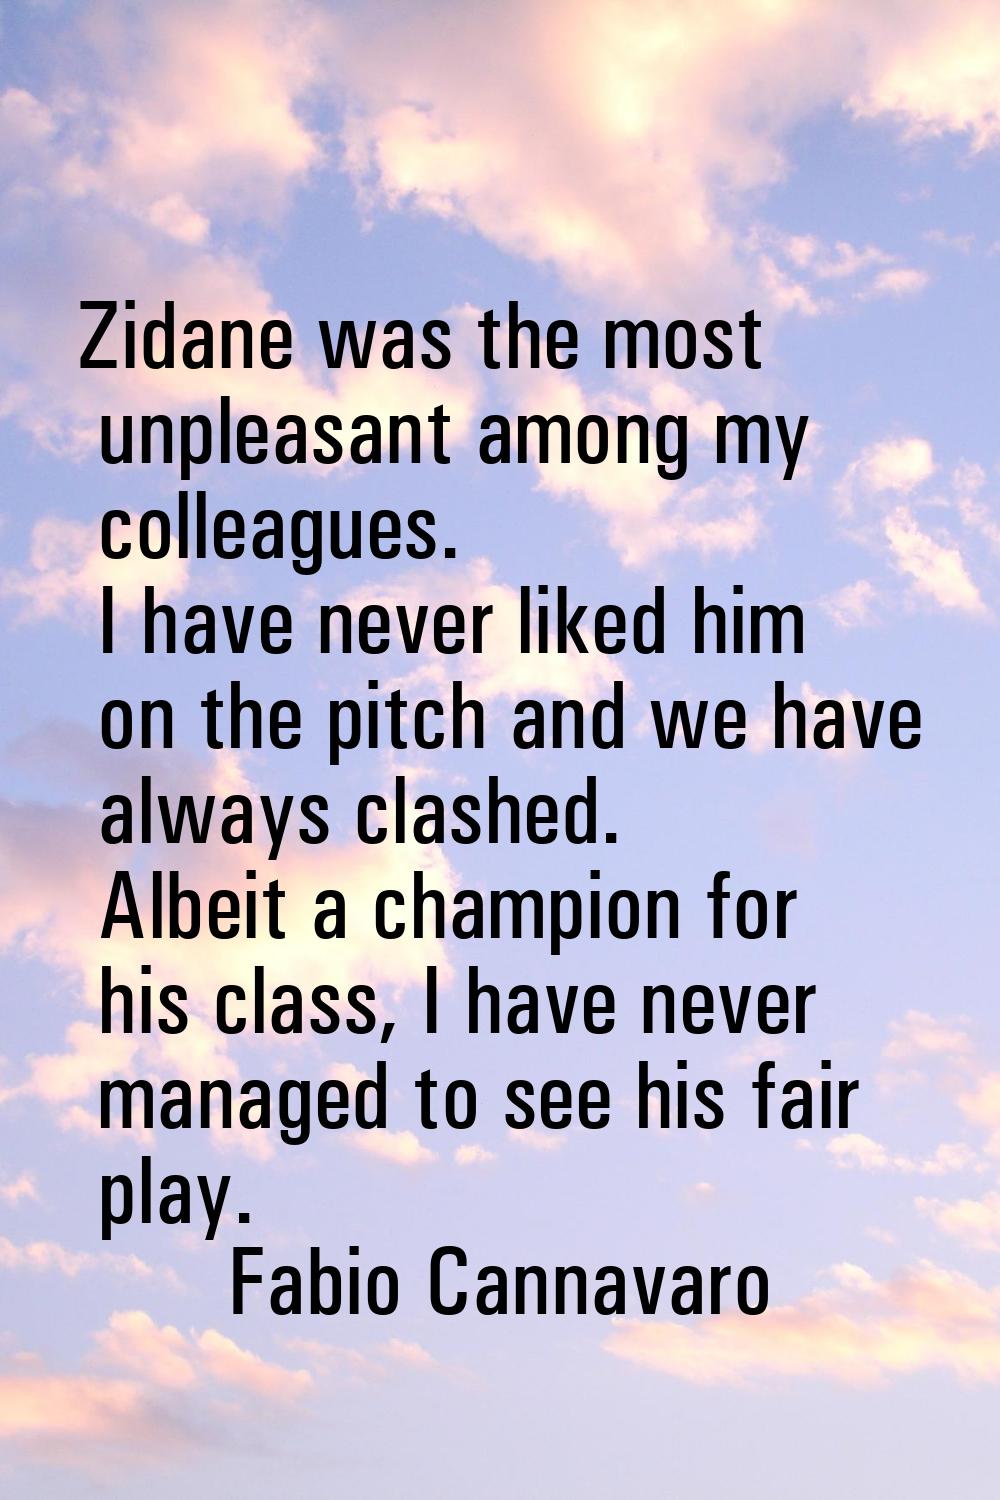 Zidane was the most unpleasant among my colleagues. I have never liked him on the pitch and we have